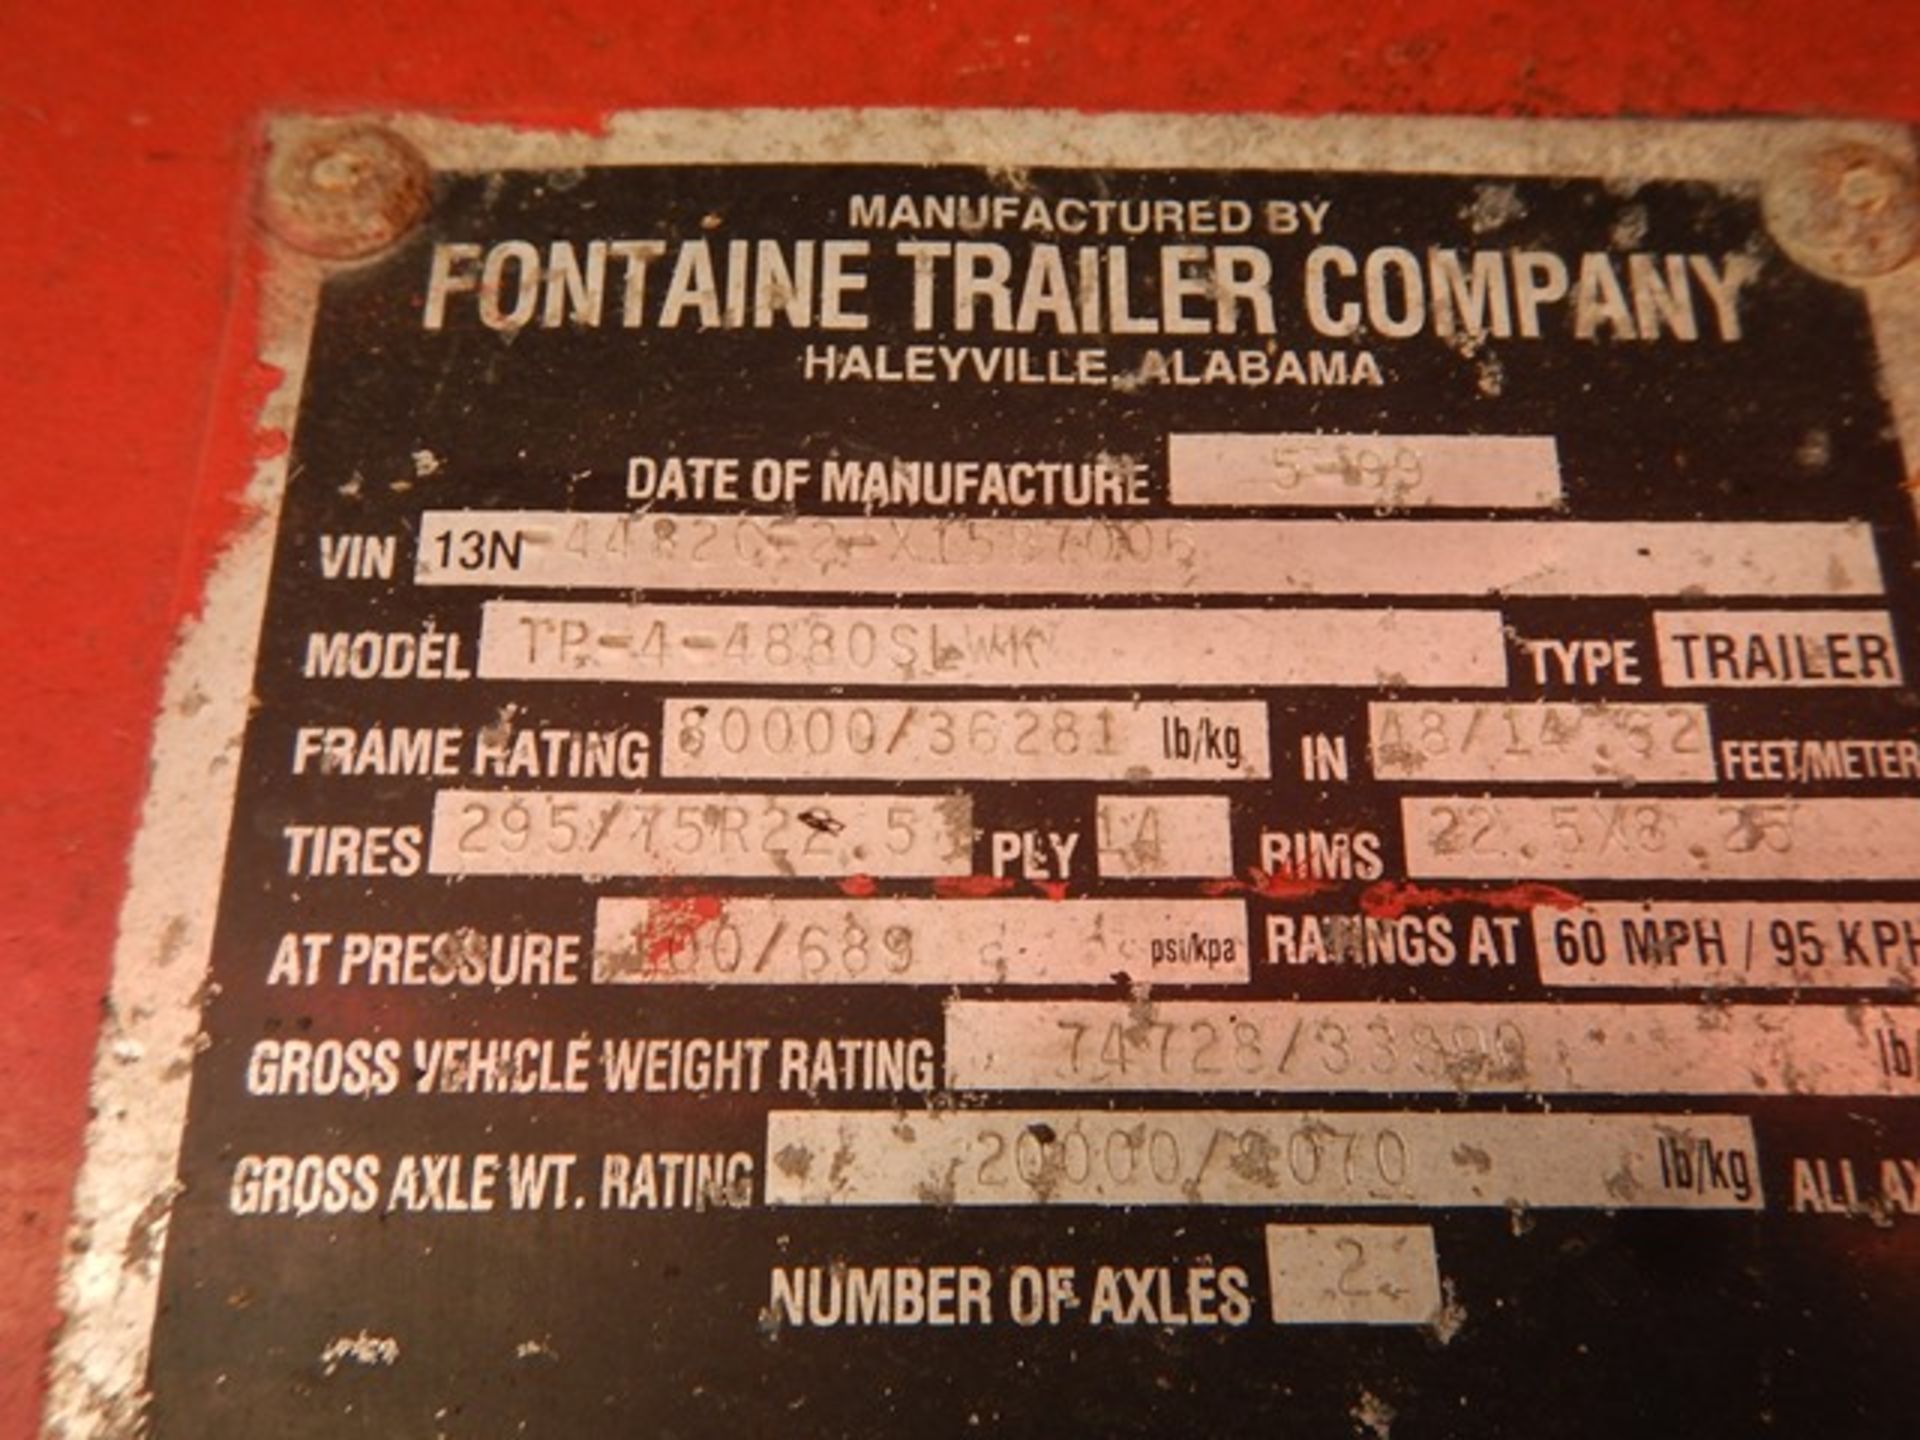 1999 FONTAINE TP-4-4880SLWK EXTENDABLE FLAT BED TRAILER - Image 20 of 23